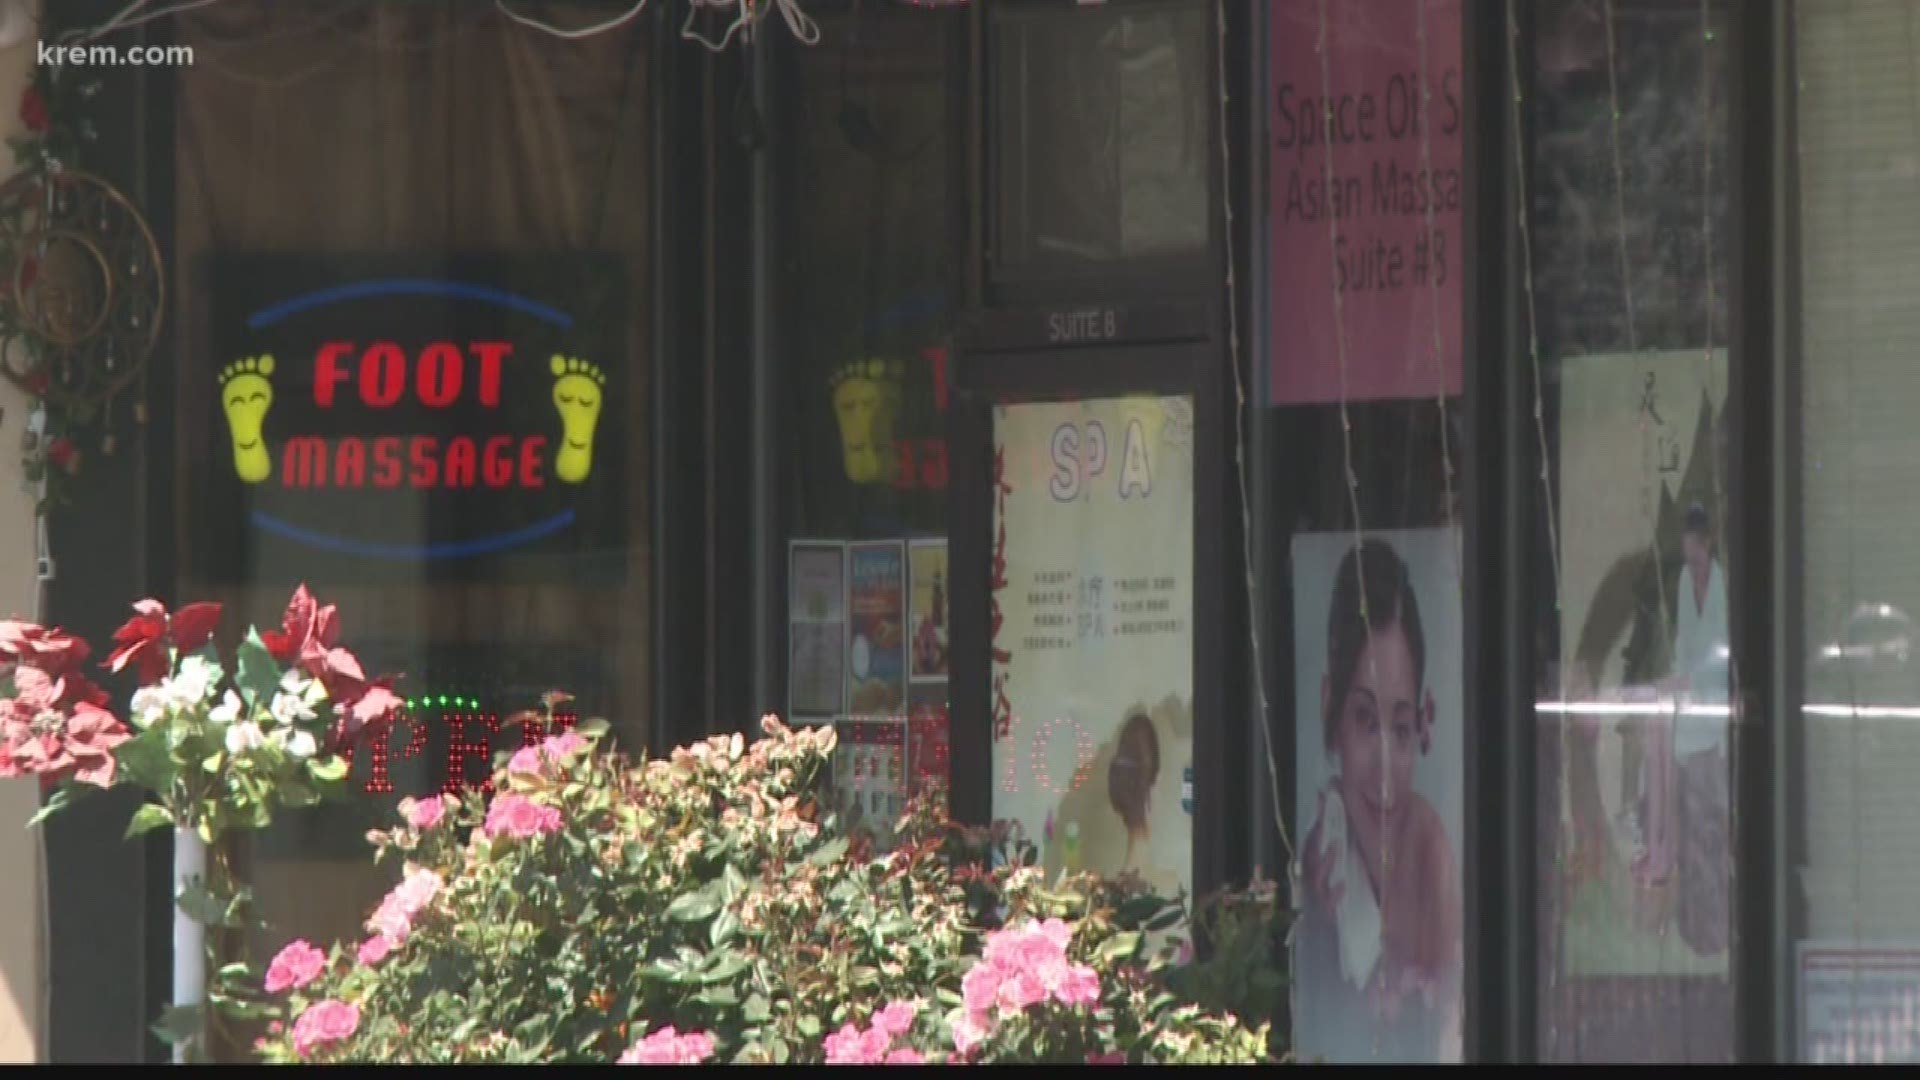 Spokane area massage parlors under investigation for prostitution and human trafficking